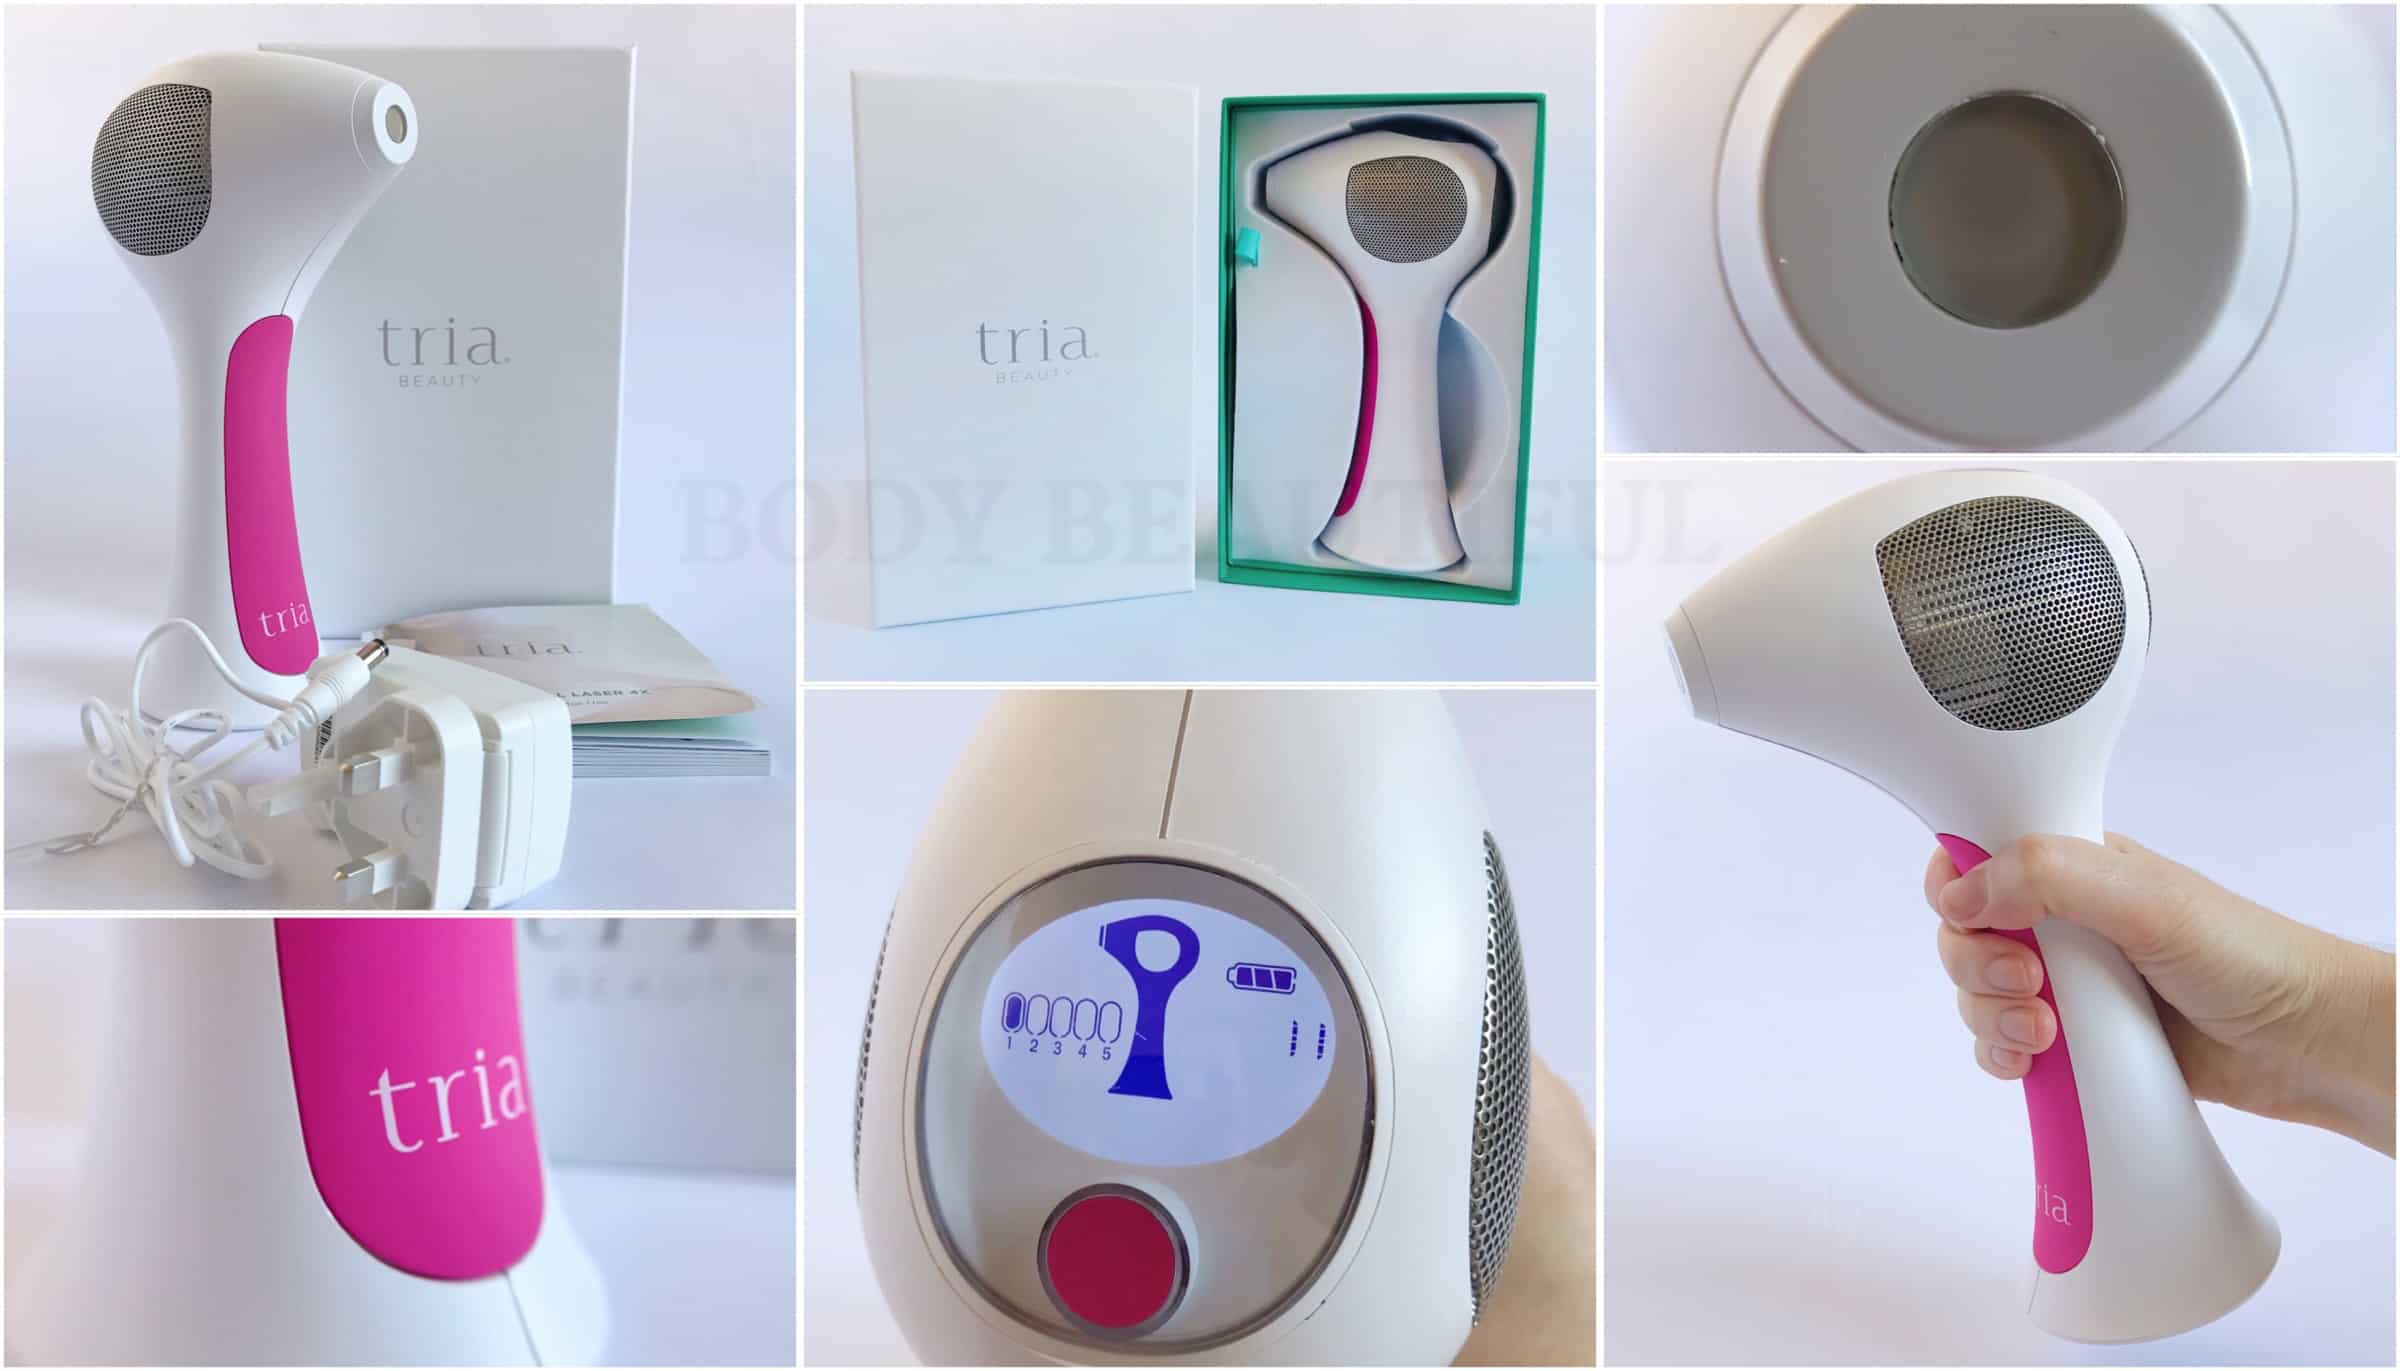 All the pros & cons in this tried & tested Tria Beauty 4X laser review